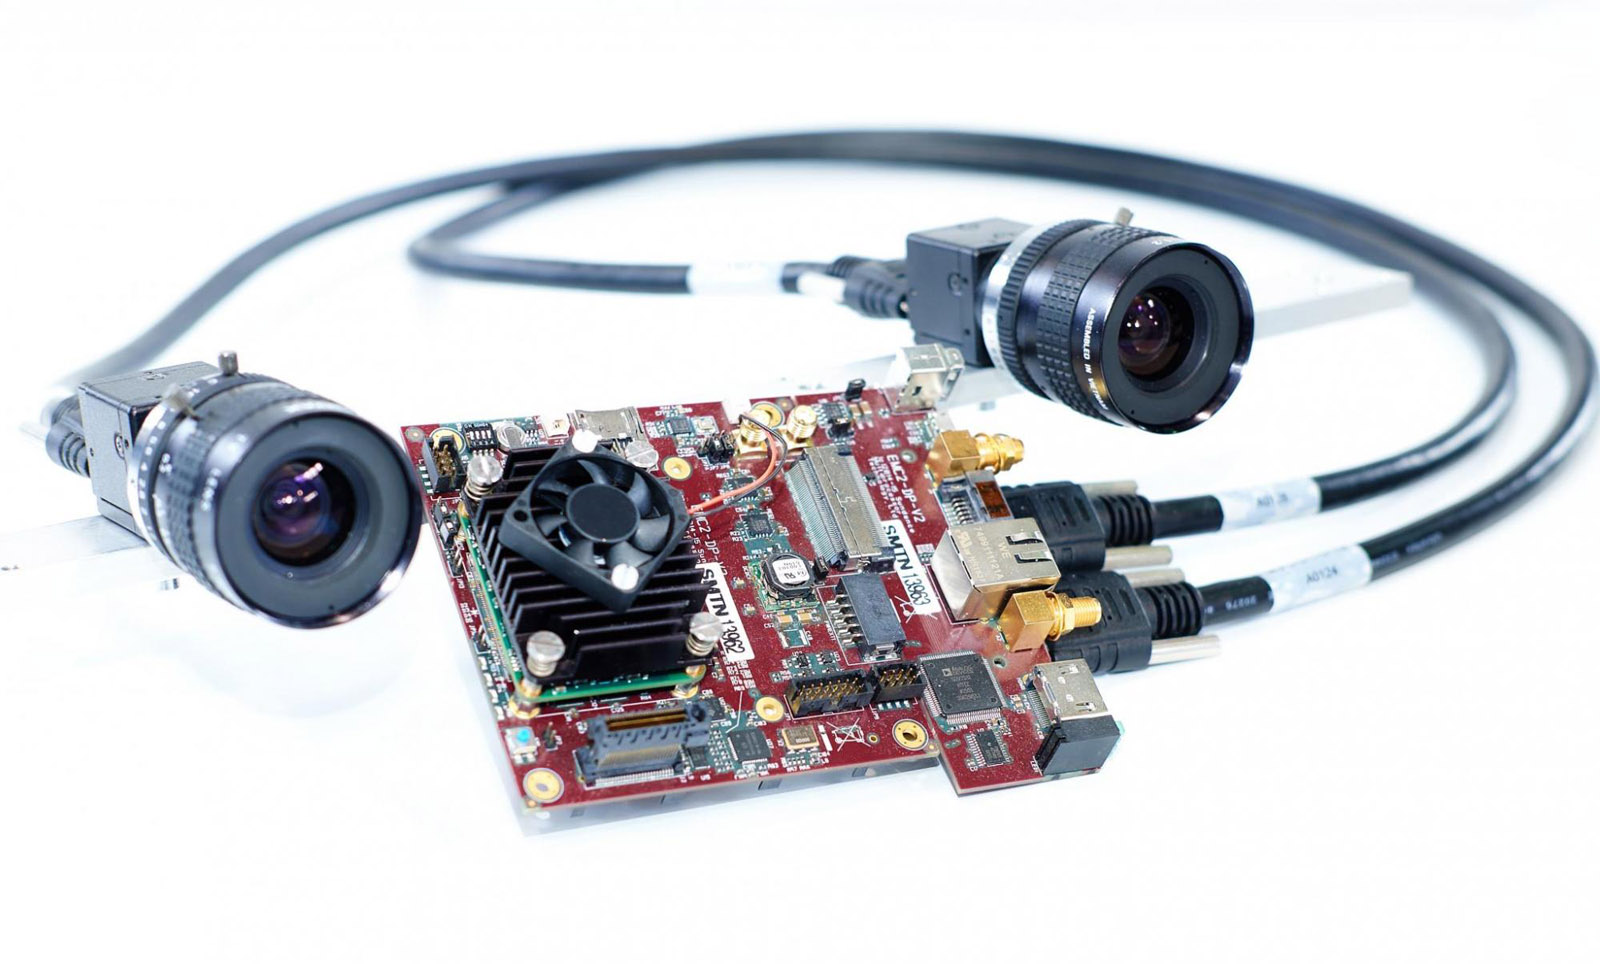 The stereo camera and the embedded system installed on the drone.